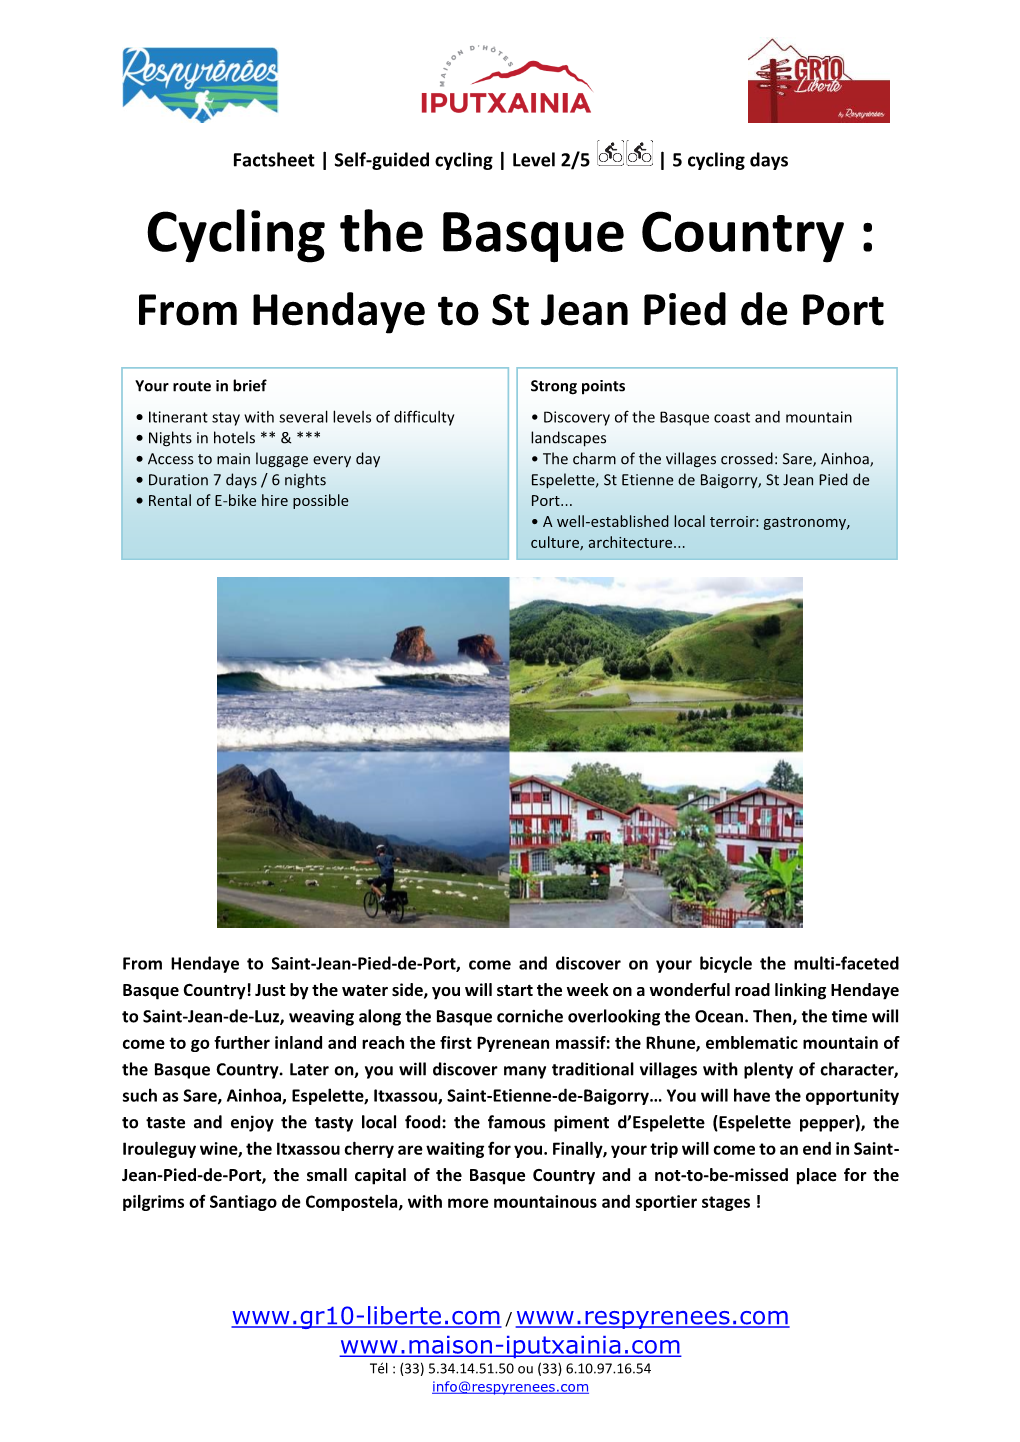 Cycling the Basque Country : from Hendaye to St Jean Pied De Port